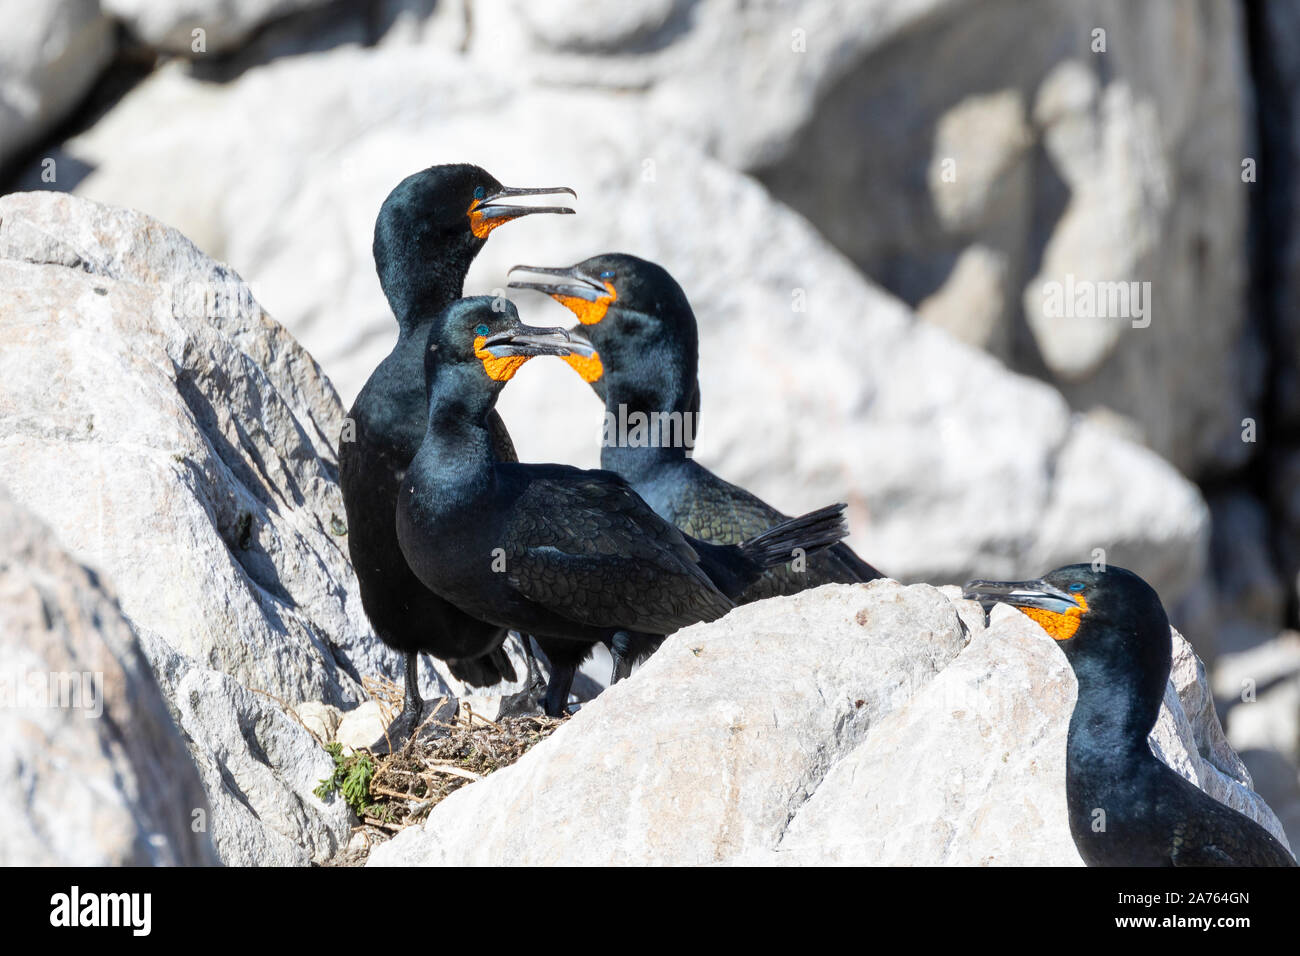 Cape Cormorant (Phalacrocorax capensis) breeding pair on nest gular fluttering in heat, Stony Point Nature Reserve, Betty's Bay, South Africa Stock Photo